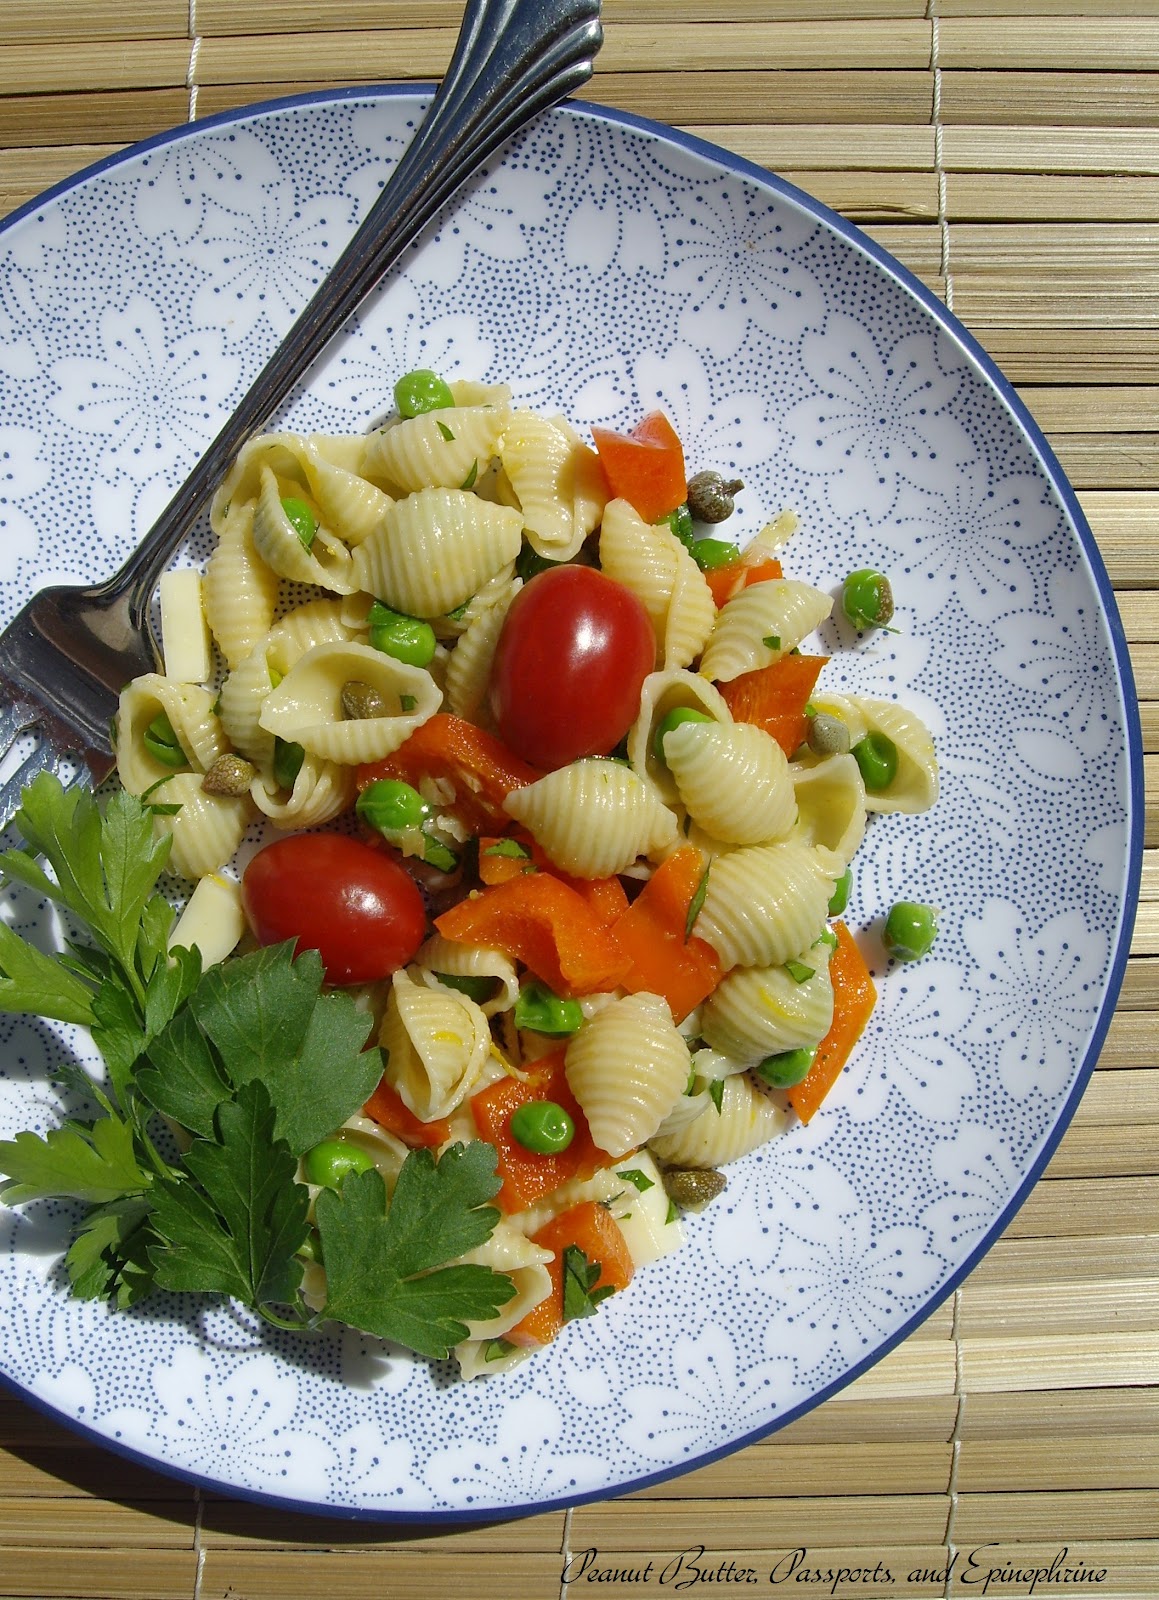 Pure and Peanut Free: Mountains of Sand and a Simple Pasta Salad